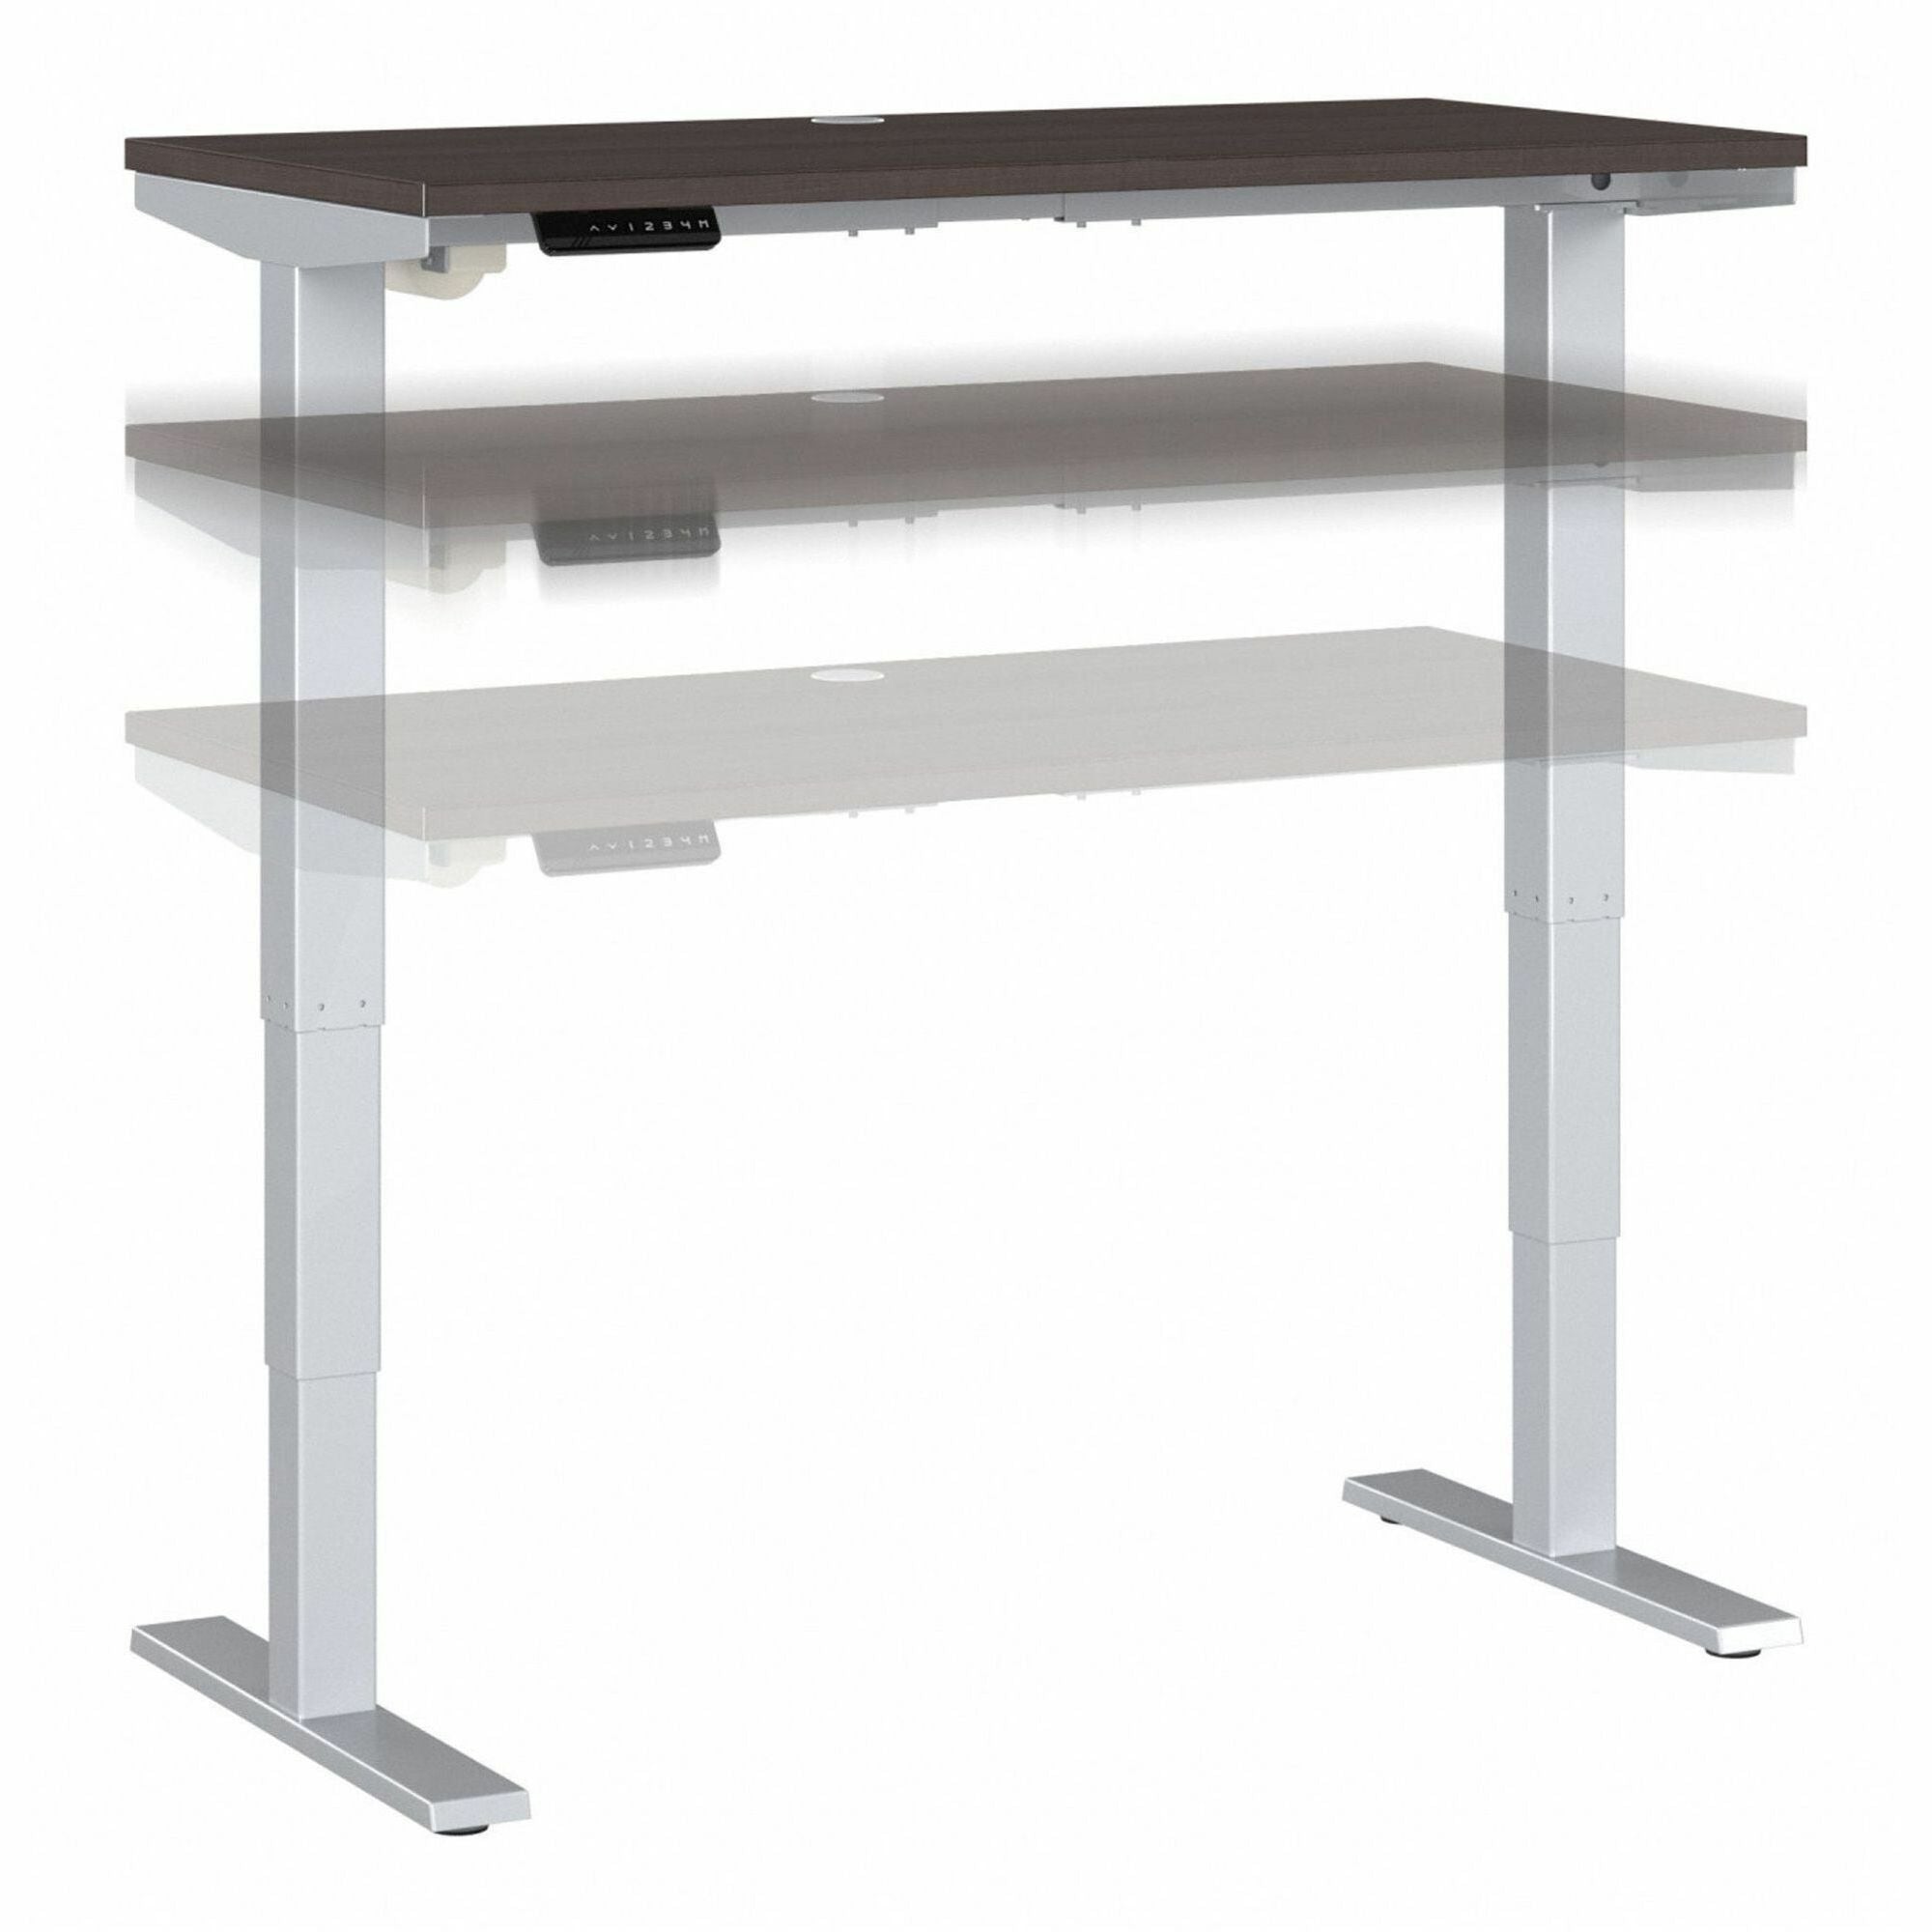 Bush Business Furniture Move 40 Series 48w X 24d Electric Height Adjustable Standing Desk - For - Table TopStorm Gray Rectangle Top - Silver T-shaped Base - 2 Legs - 176 lb Capacity - Adjustable Height - 24" to 48" Adjustment x 47.60" Table Top Width - 1